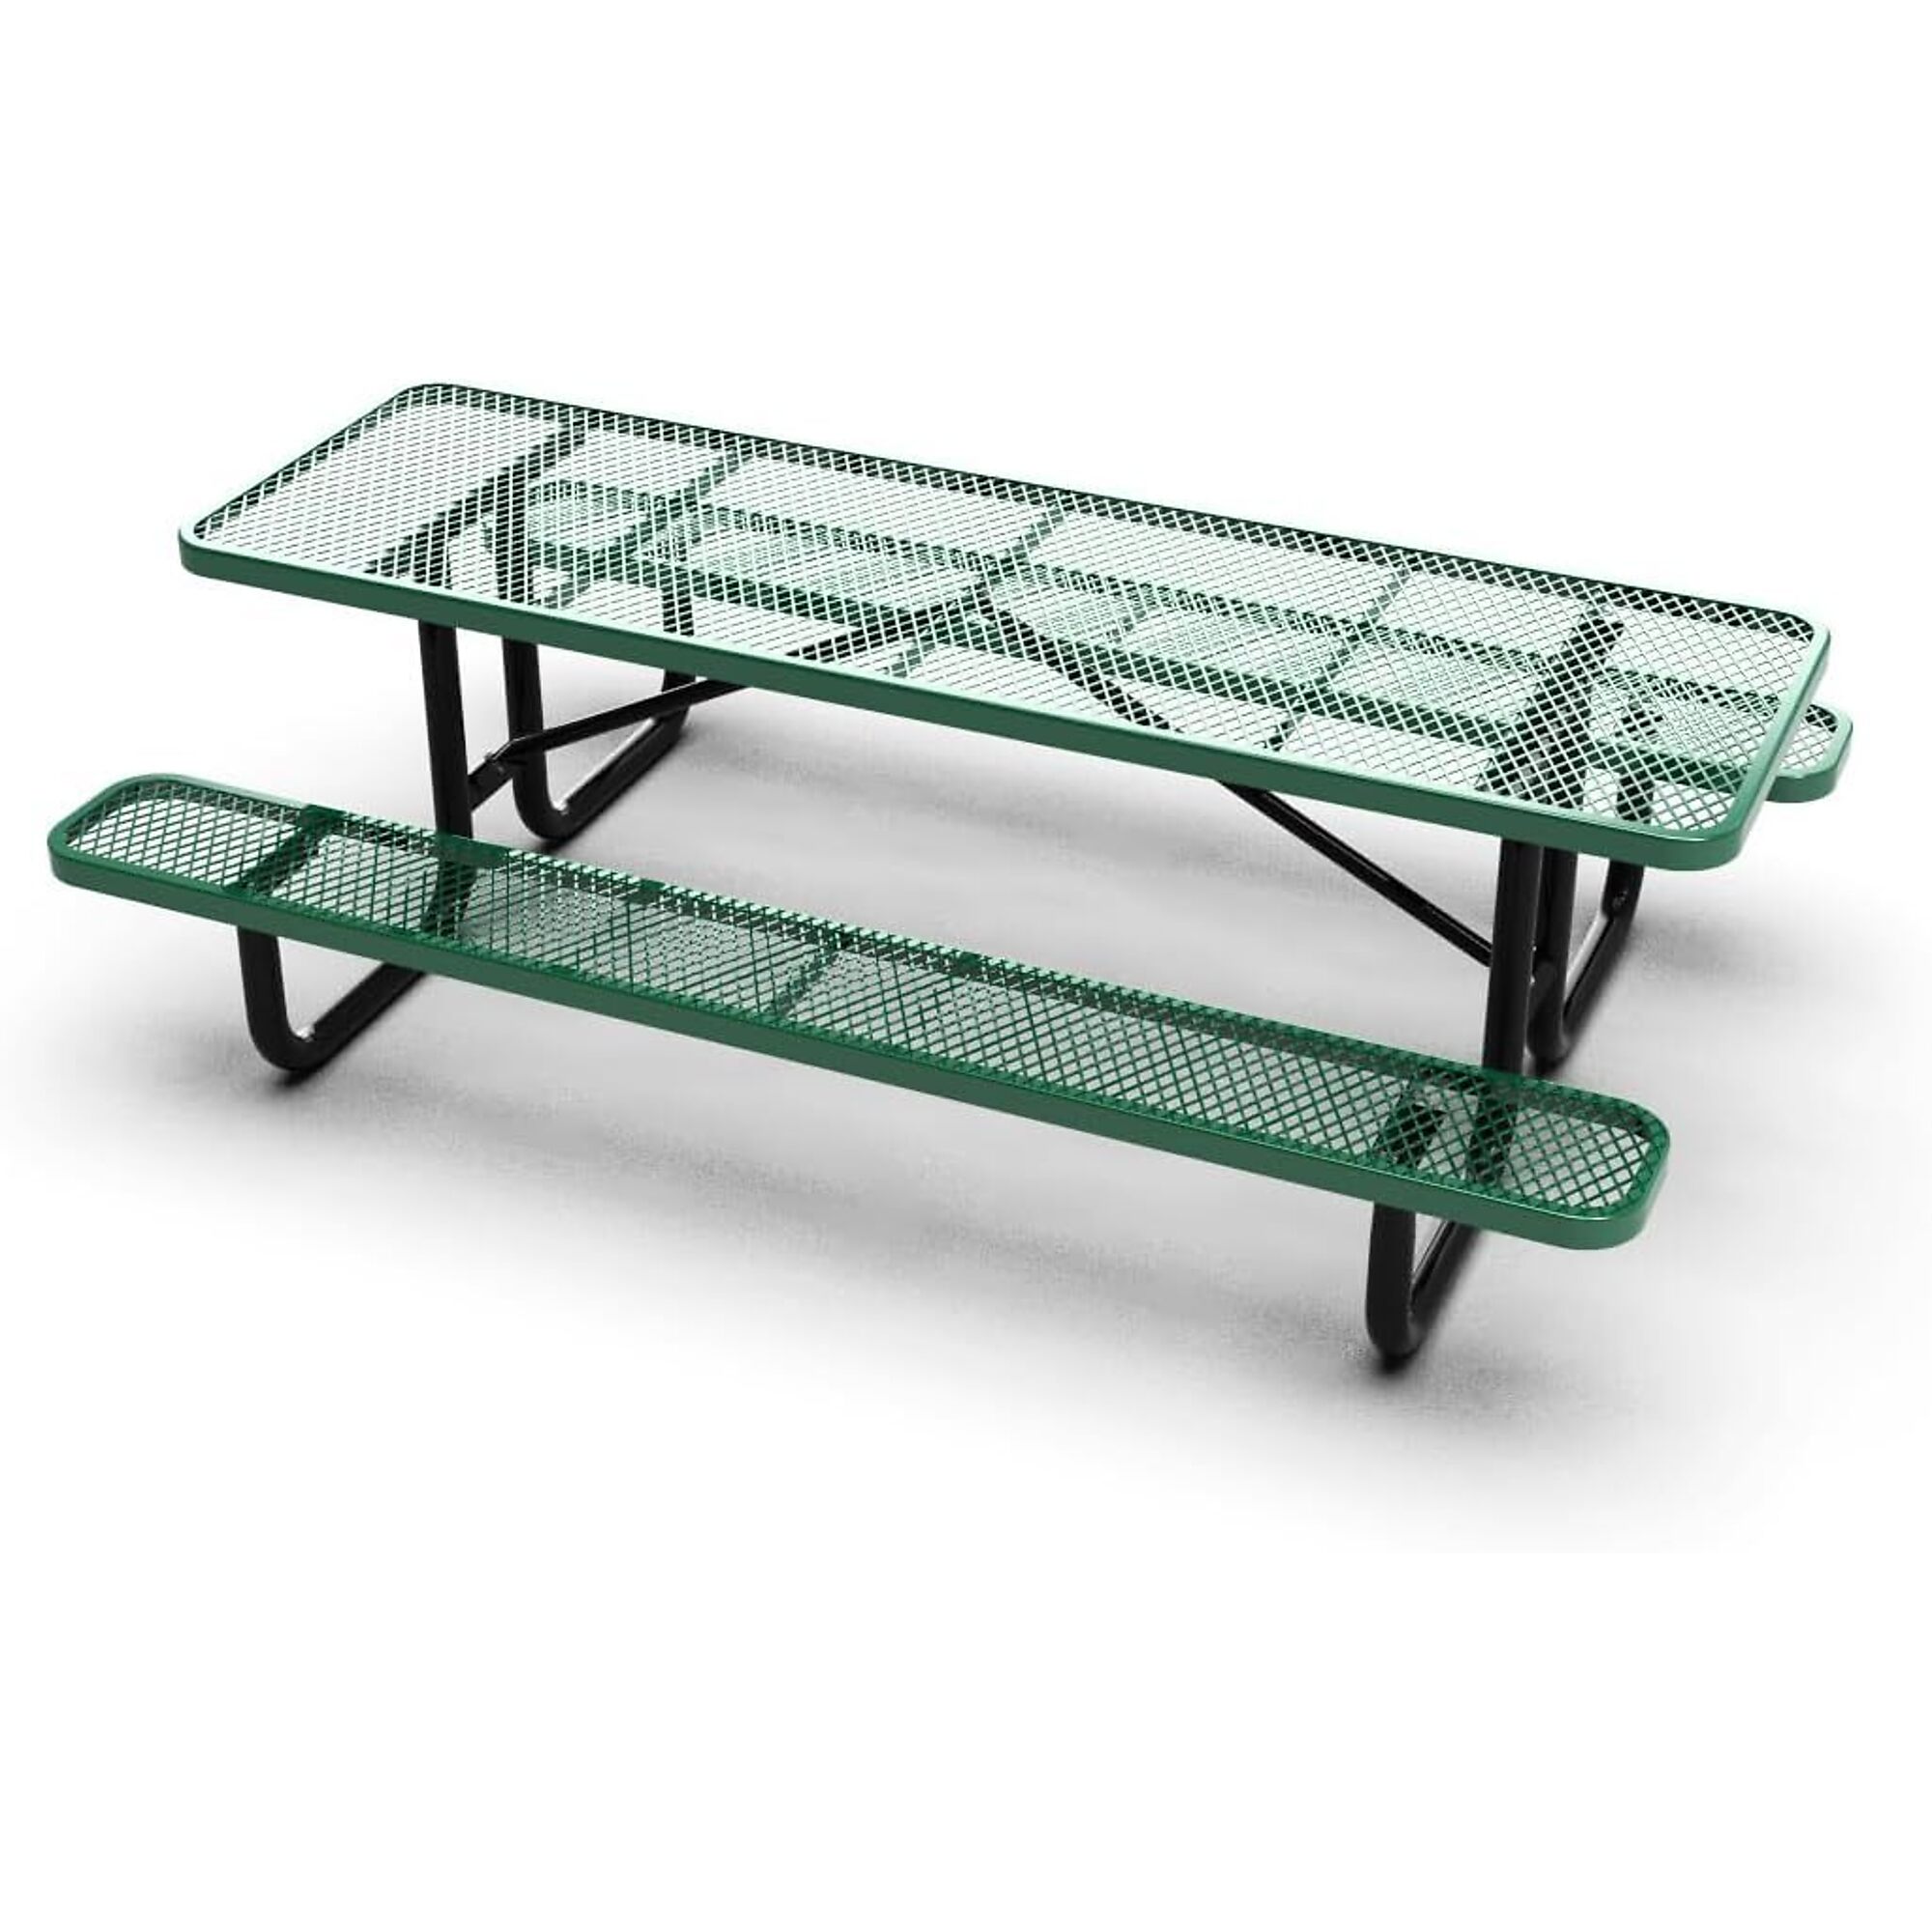 Park Elements, 8ft. thermoplastic coated commercial picnic table, Table Shape Rectangle, Primary Color Green, Height 30 in, Model CD-96PT-GRN